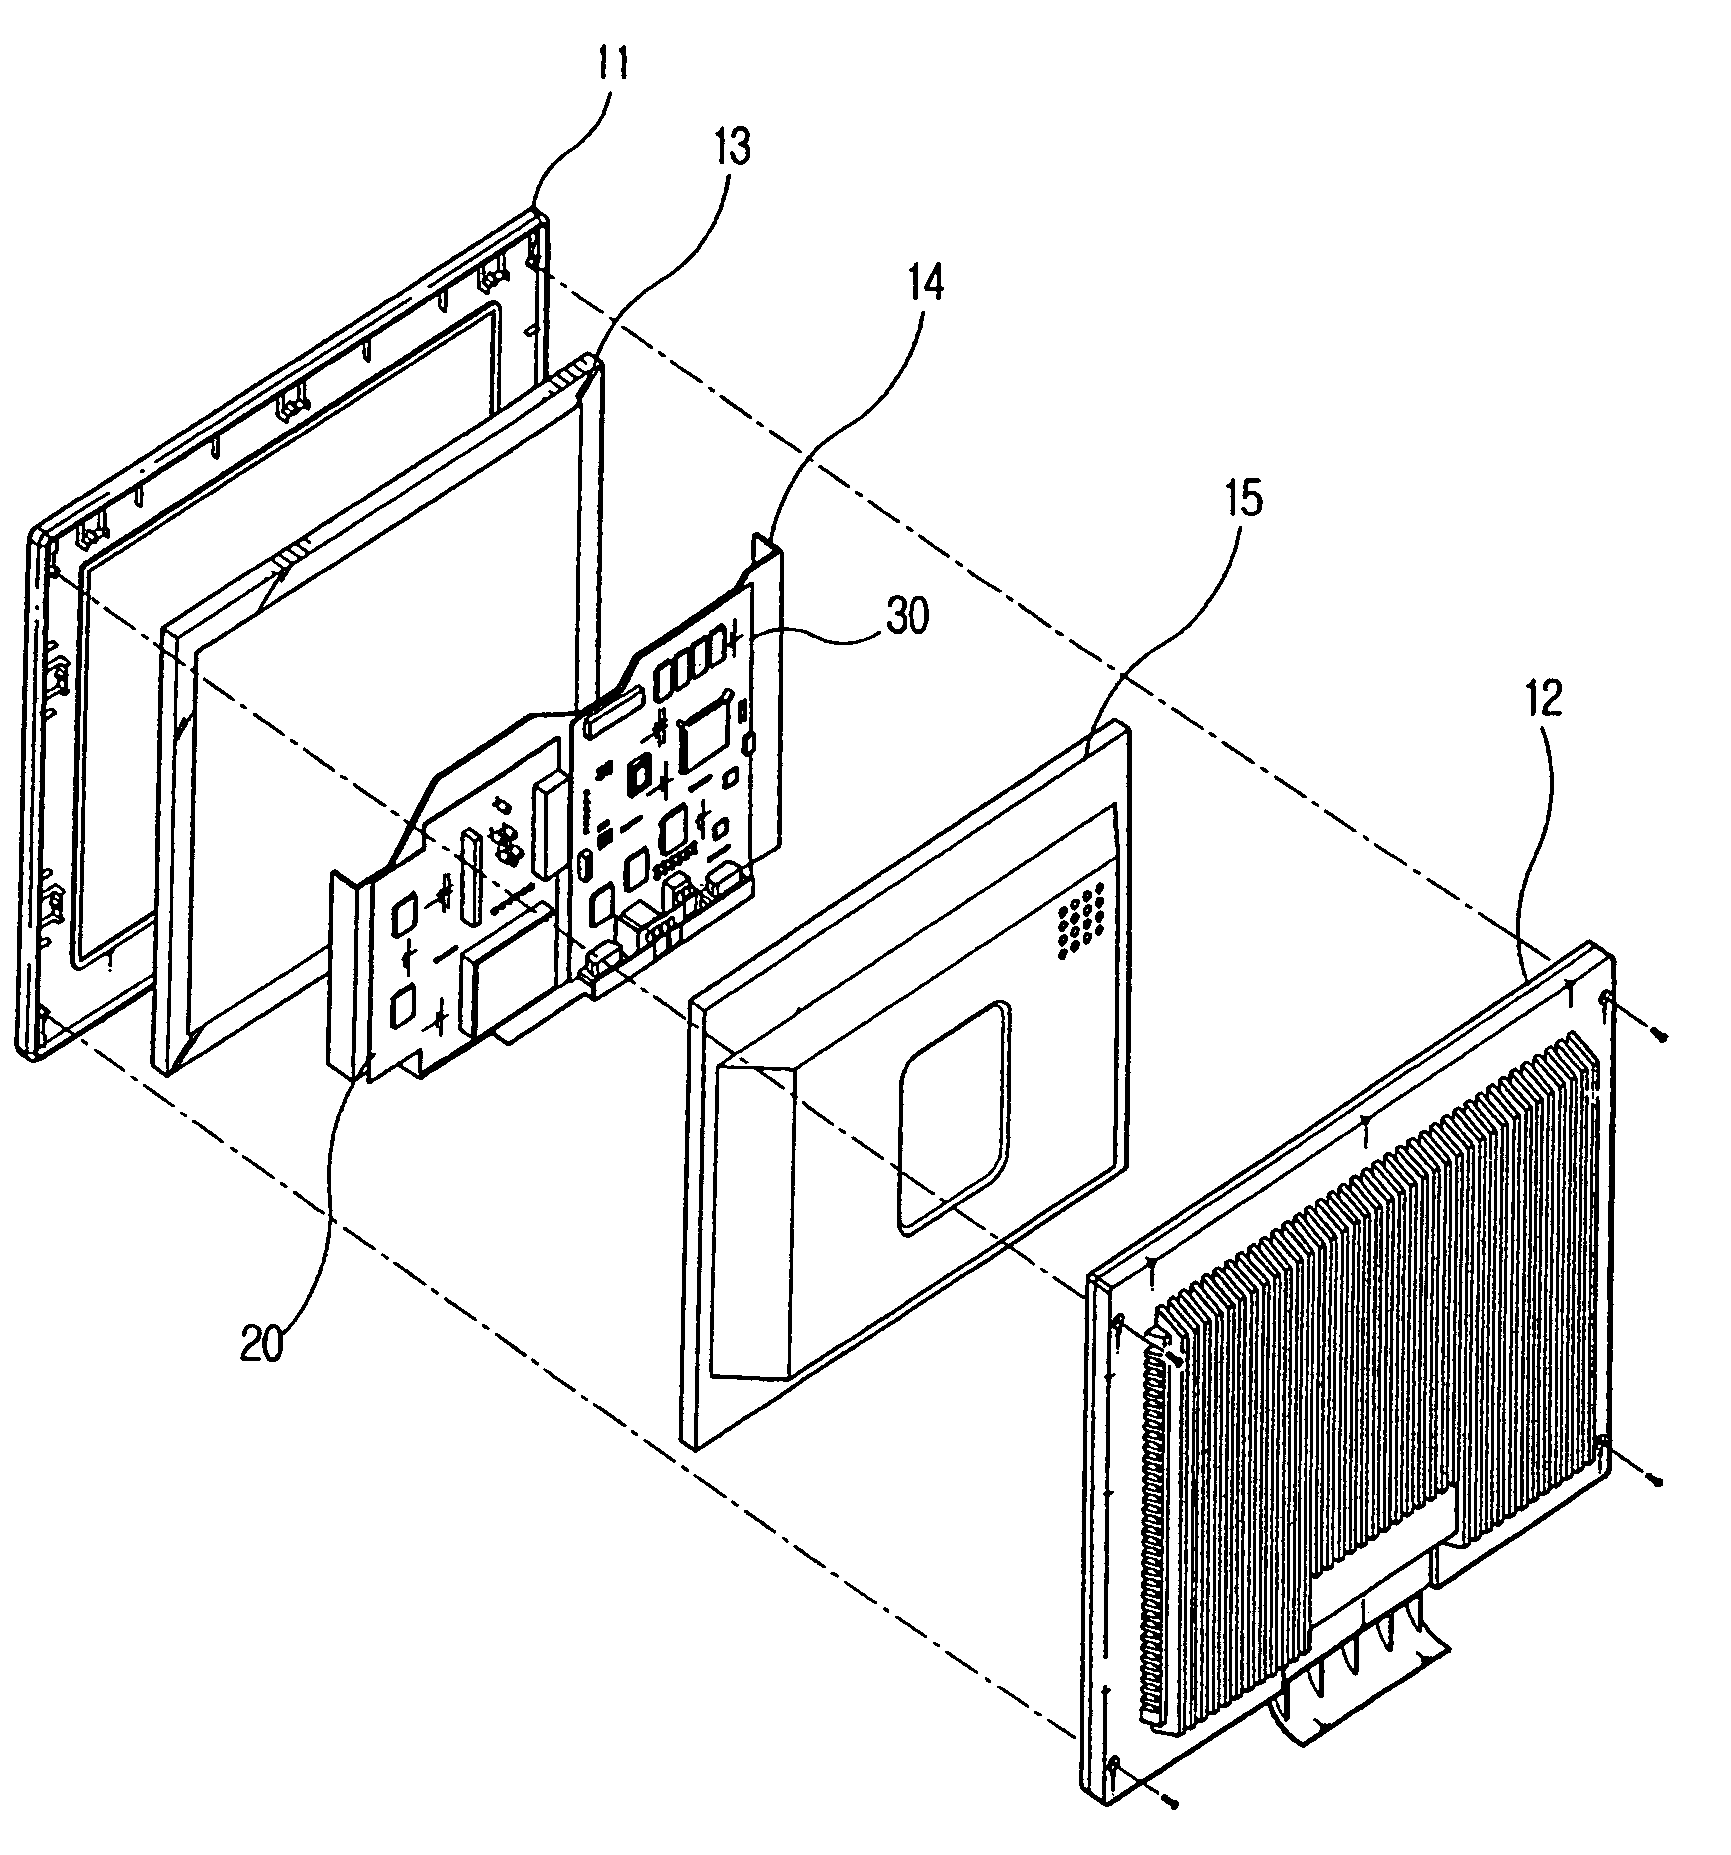 Display apparatus having a display module that supports various functions